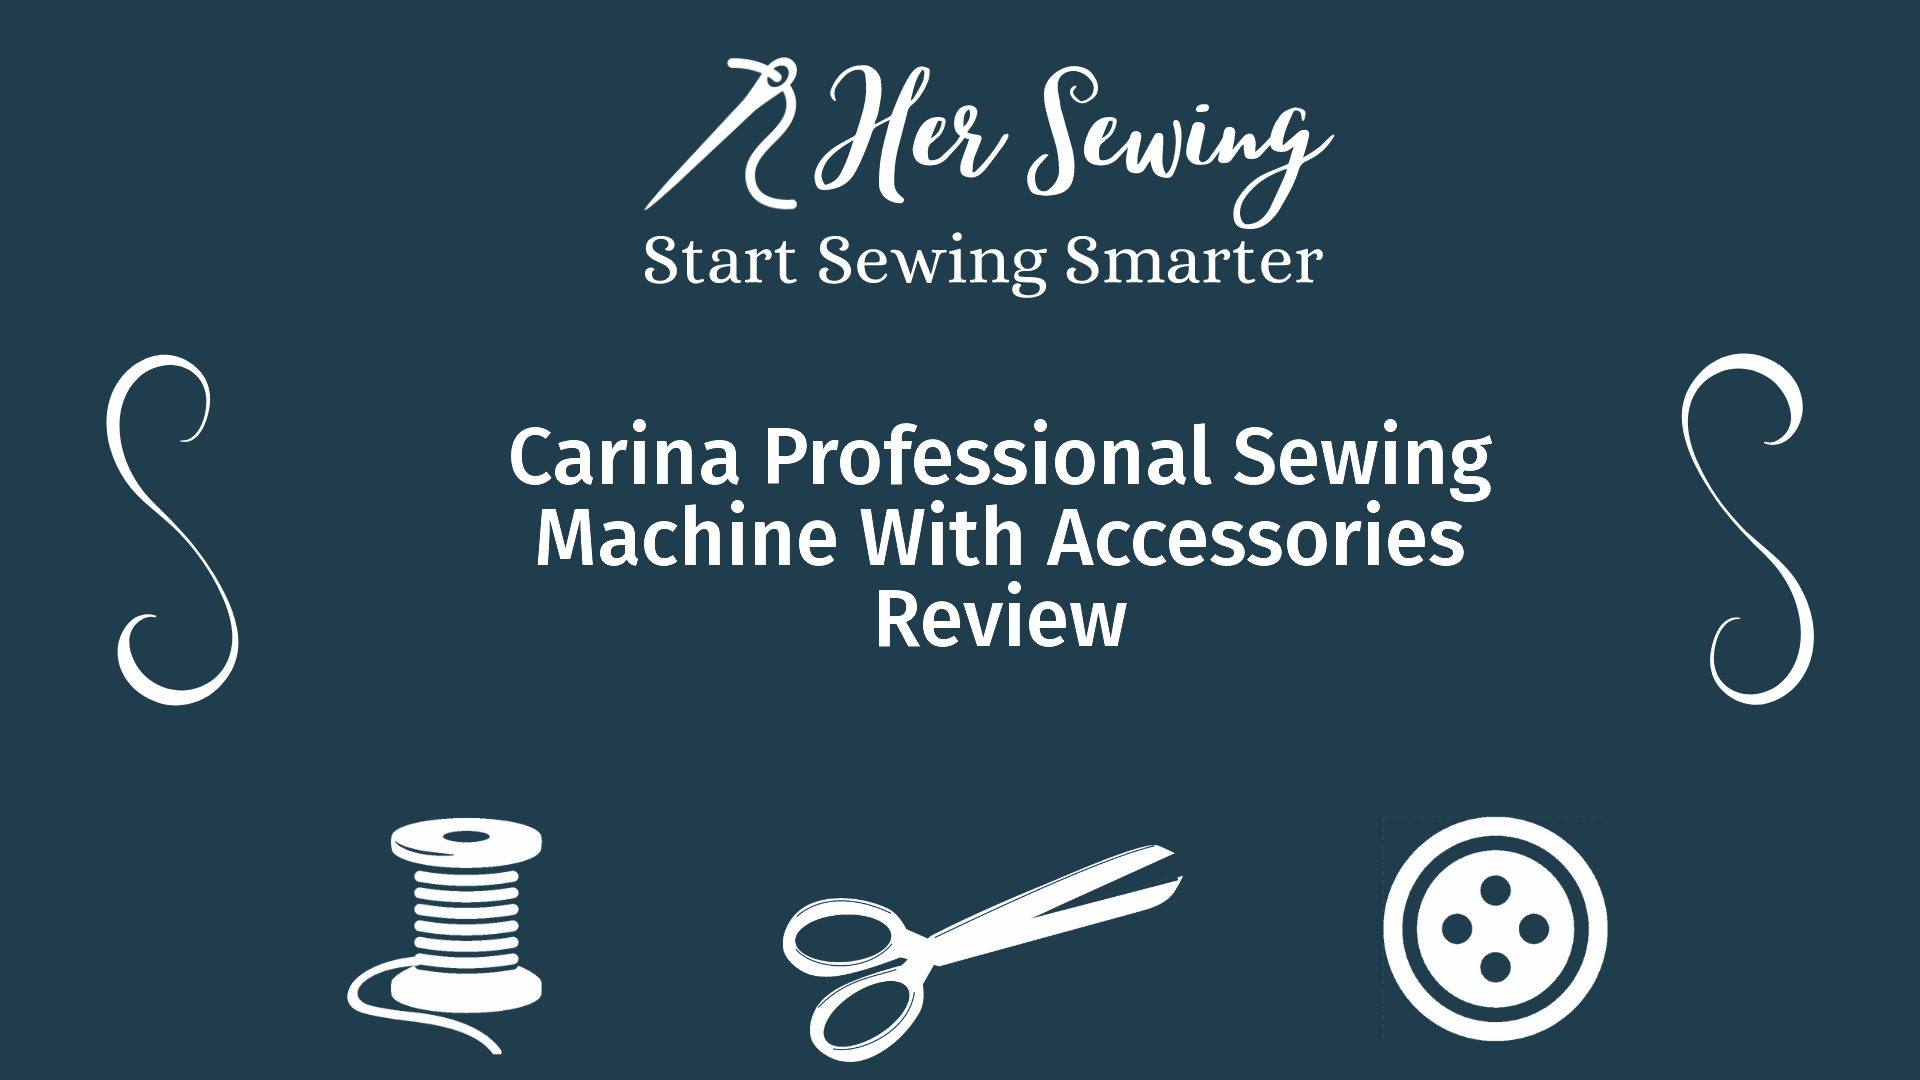 Carina Professional Sewing Machine With Accessories Review